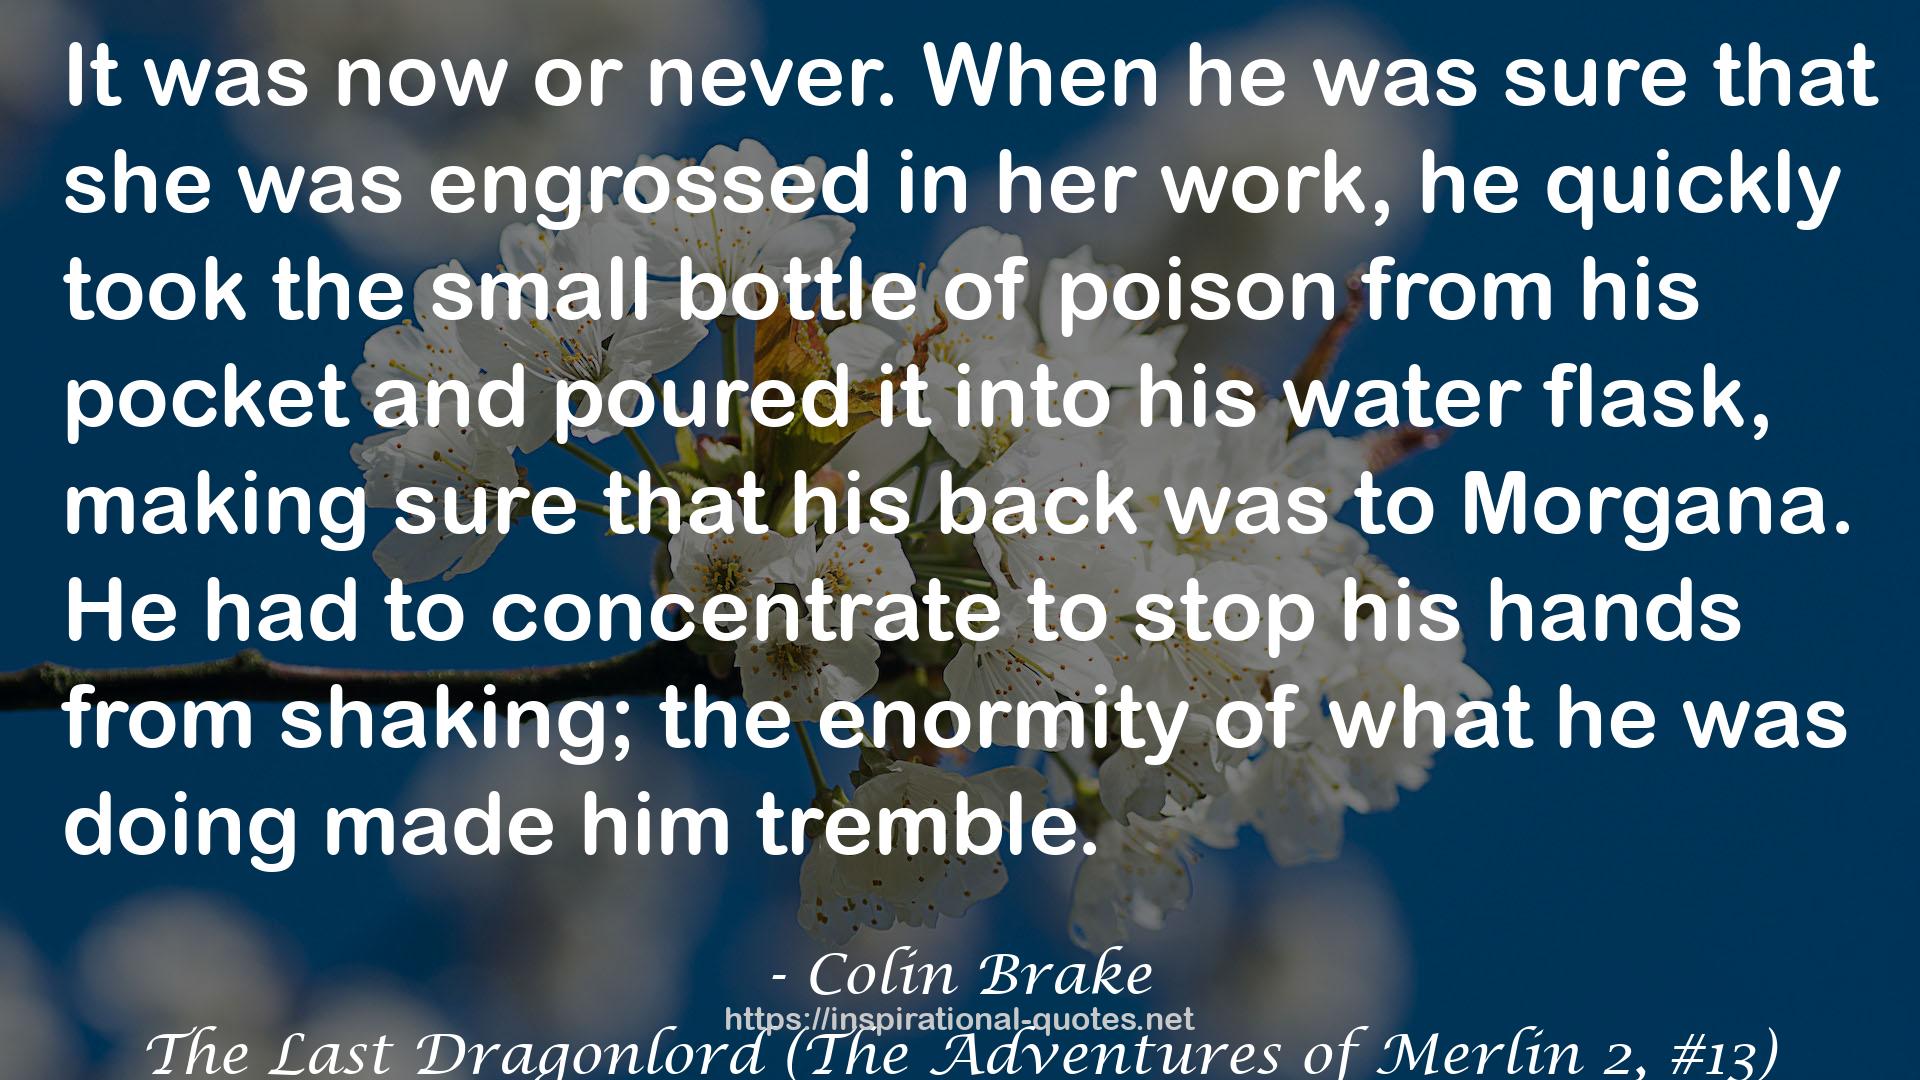 The Last Dragonlord (The Adventures of Merlin 2, #13) QUOTES